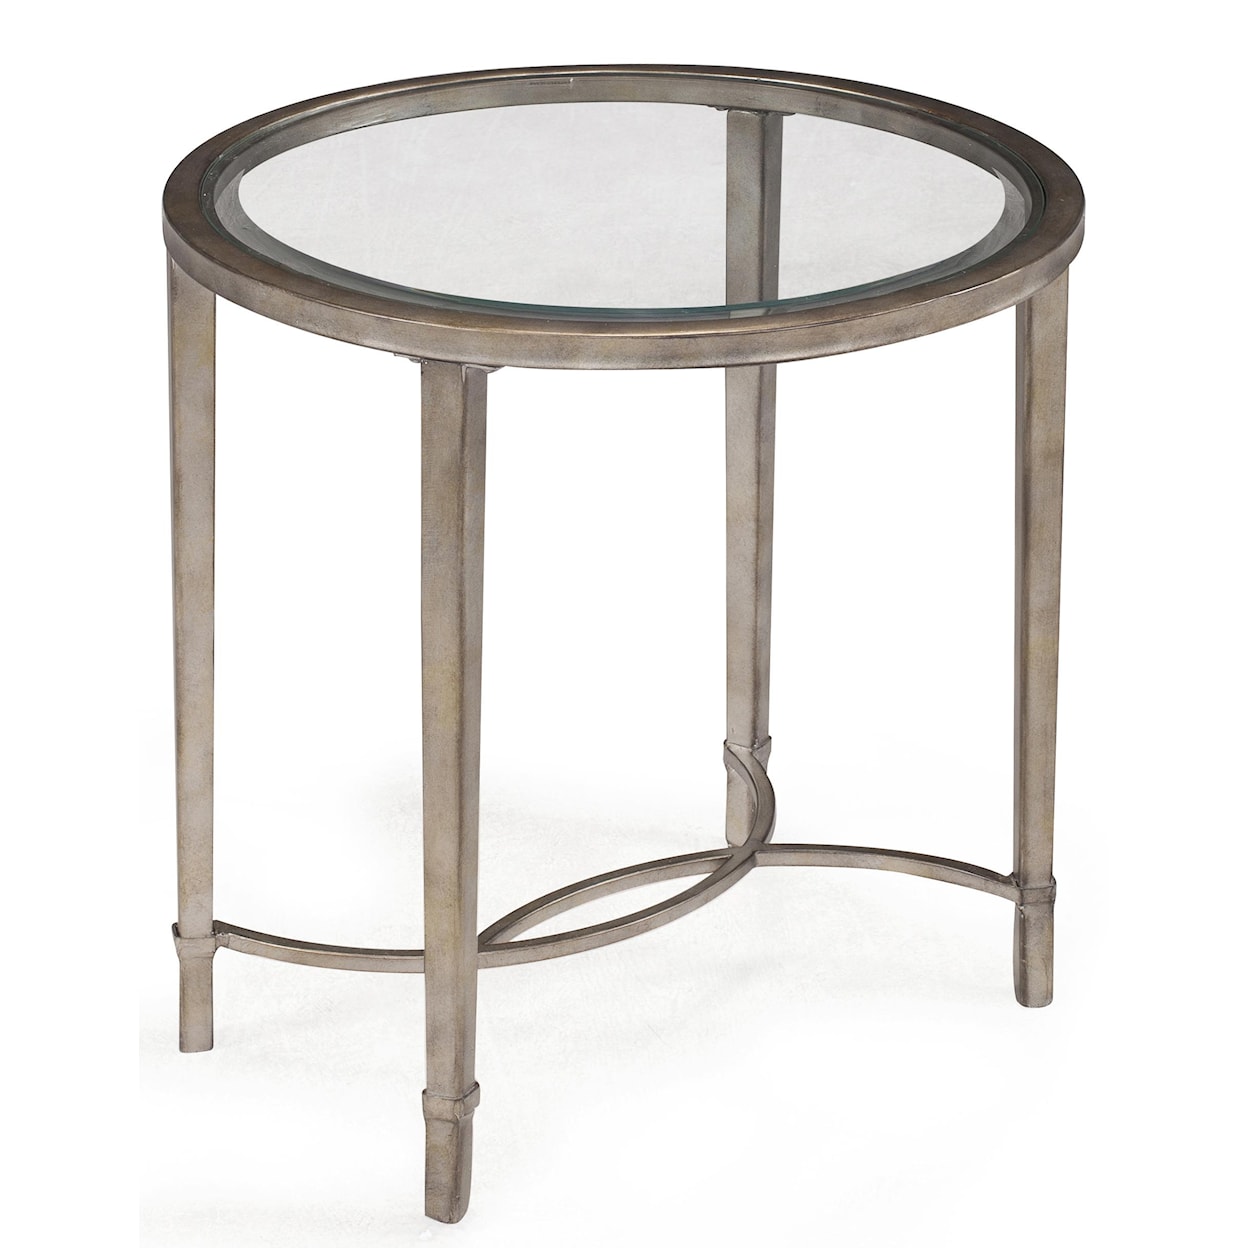 Magnussen Home Copia Occasional Tables Oval End Table